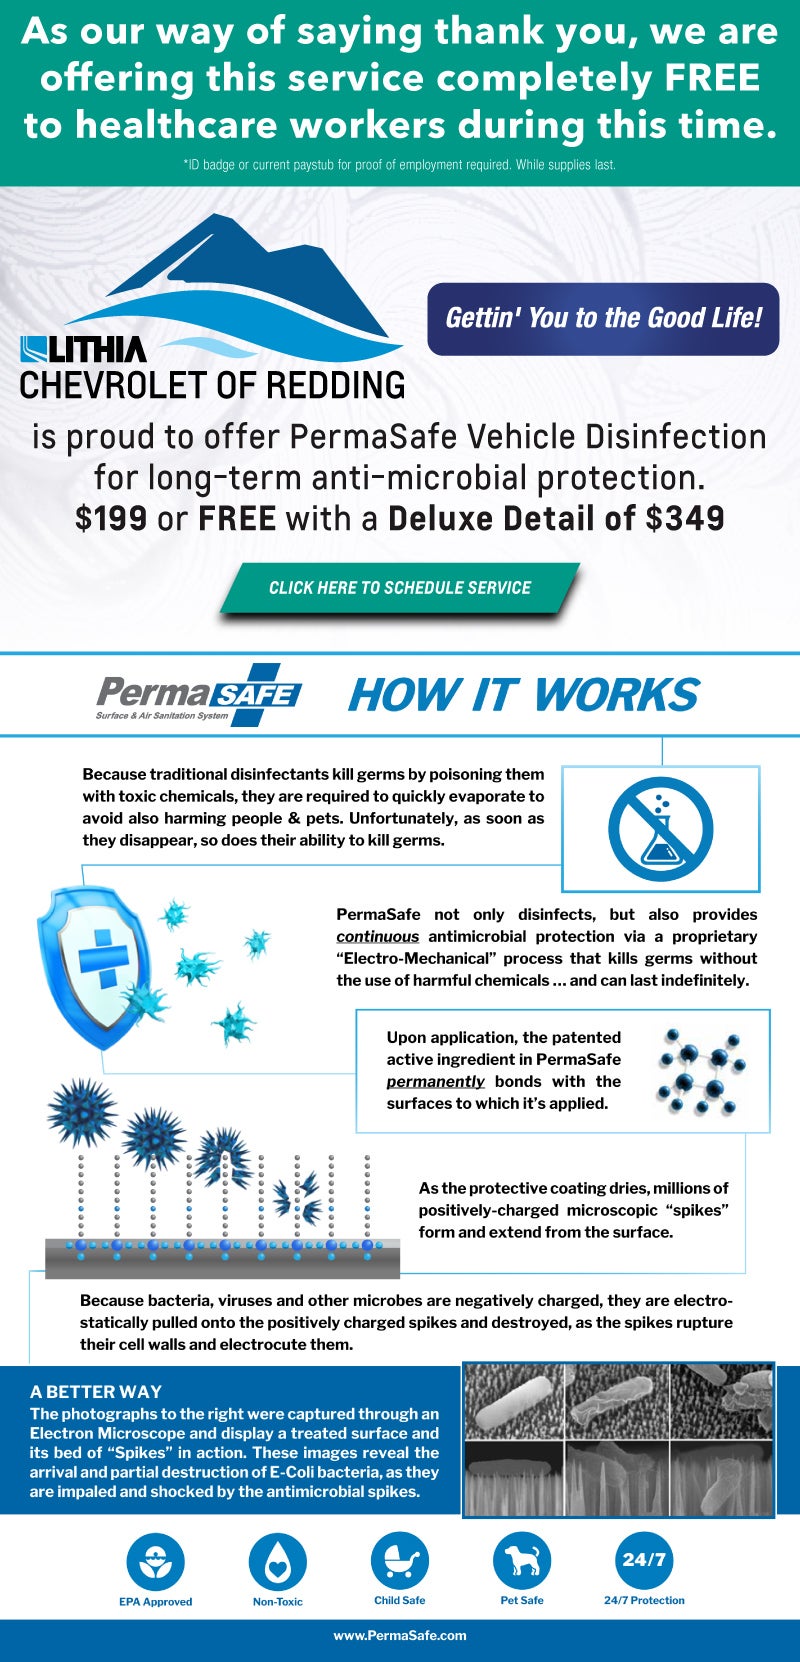 Lithia Chevrolet of Redding is proud to offer PermaSafe Vehicle Disinfection for long-term anti-microbial protection. $199 or FREE with a Deluxe Detail of $349